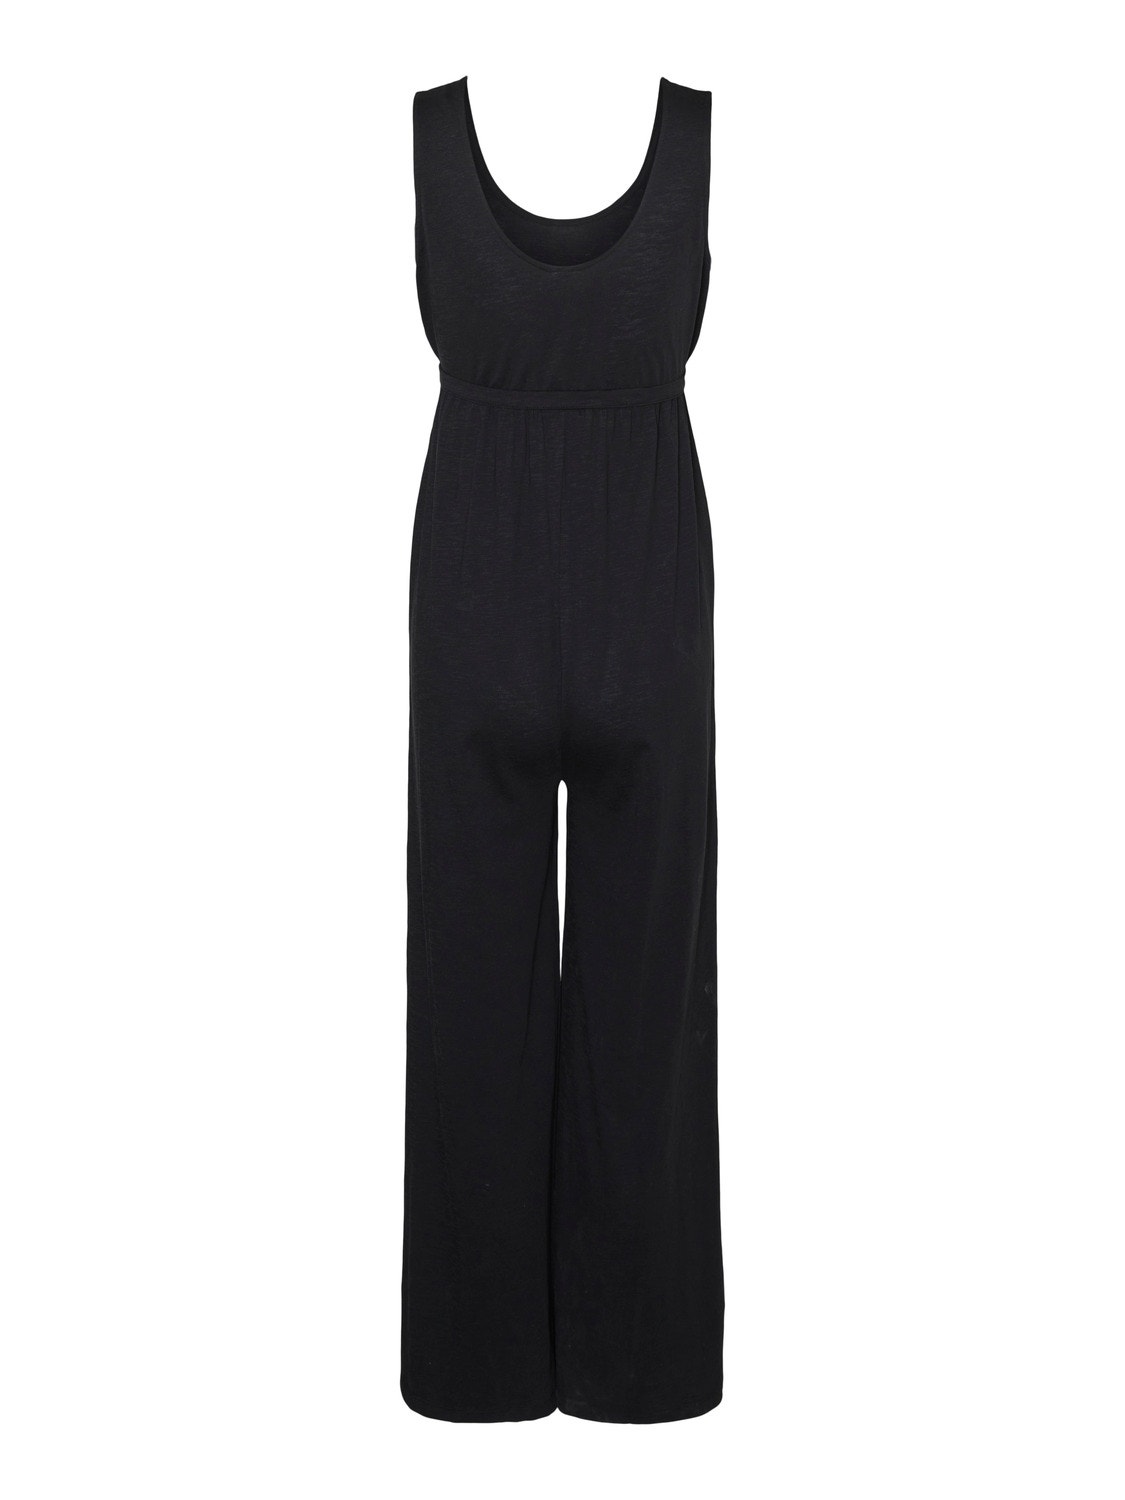 MAMA.LICIOUS Umstands-jumpsuit -Black - 20020162